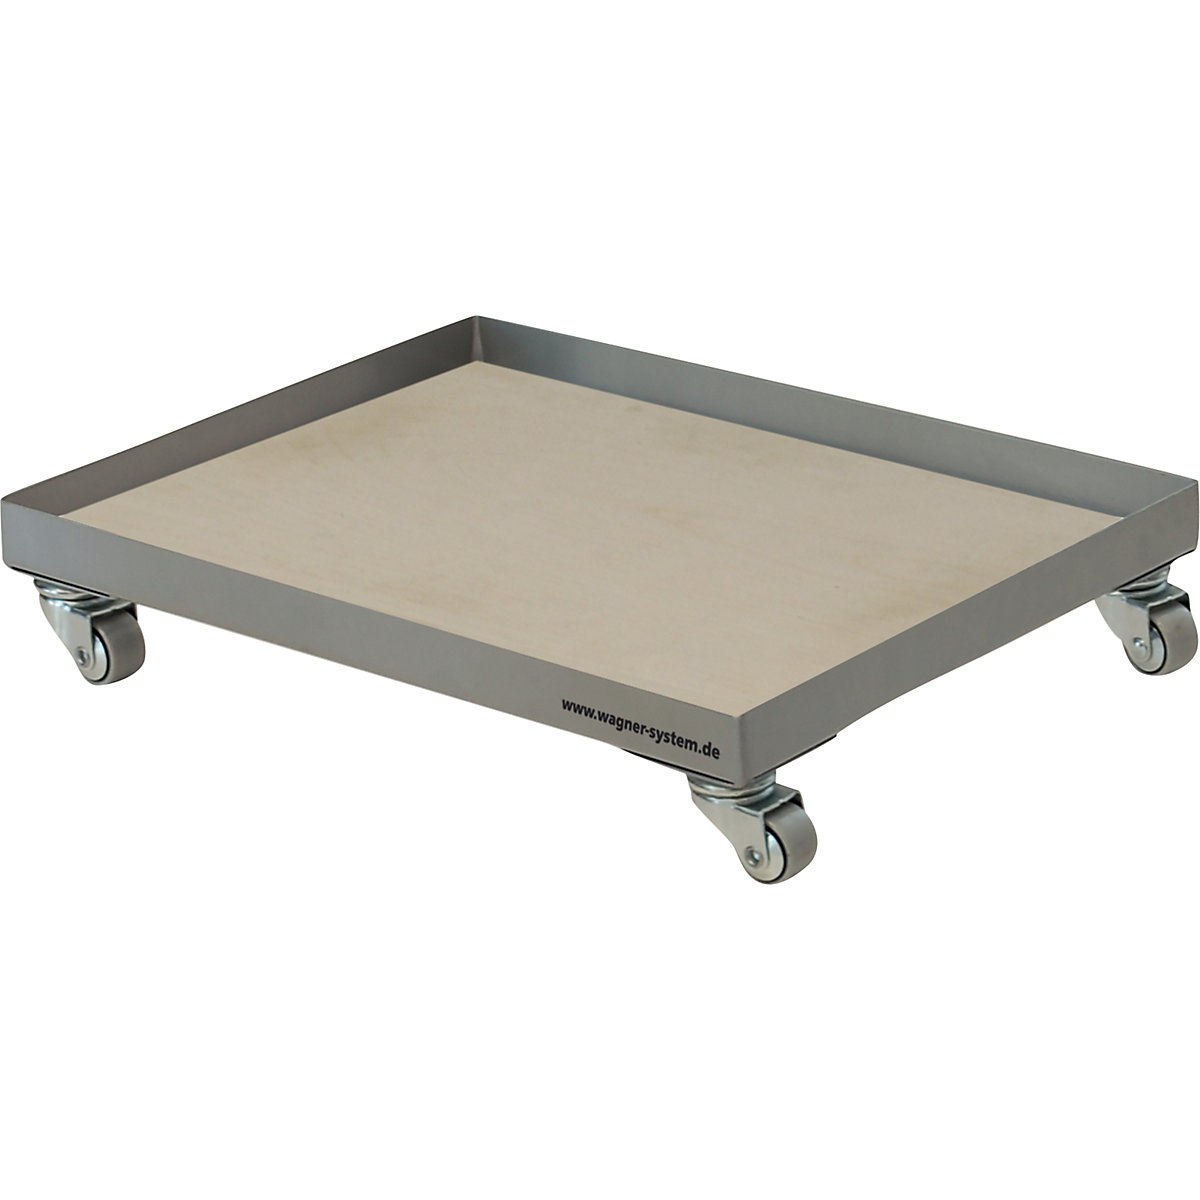 BOTTLE BUTLER transport dolly – Wagner, MM 1184, LxW 400 x 300 mm, max. load 100 kg, 2+ items-2